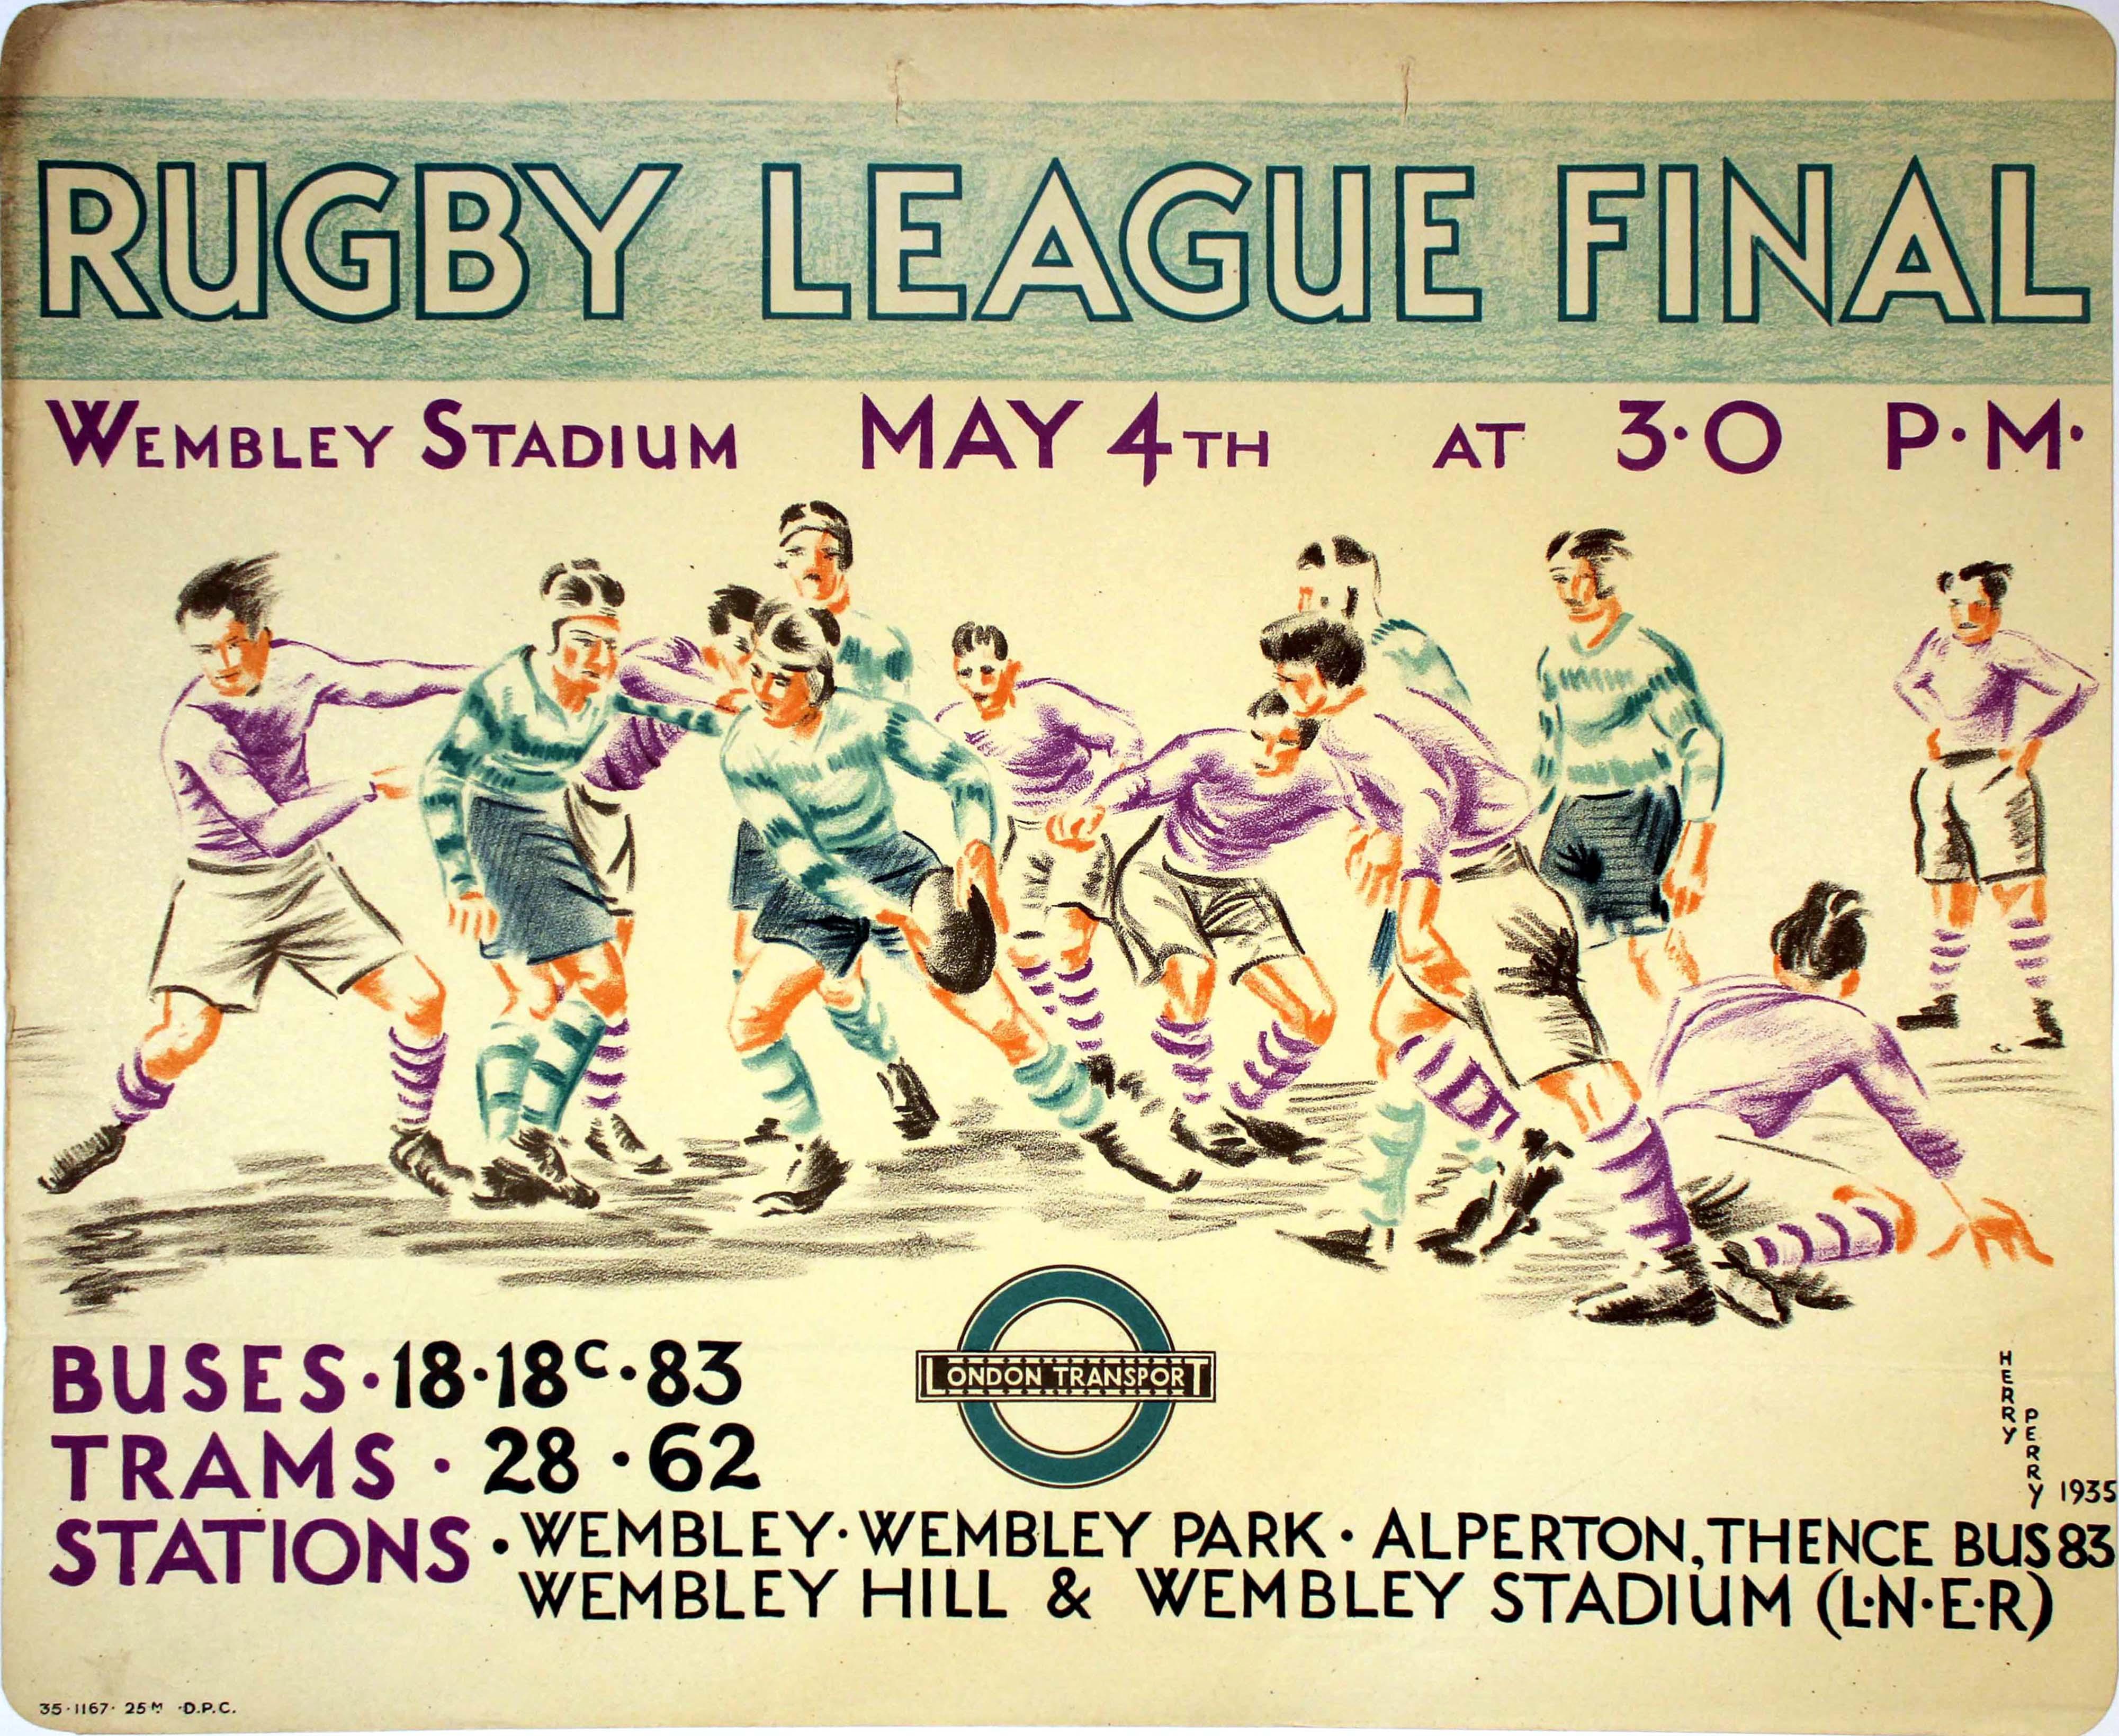 Heather Perry Print - Original Vintage London Transport Rugby League Final Wembley Stadium Herry Perry